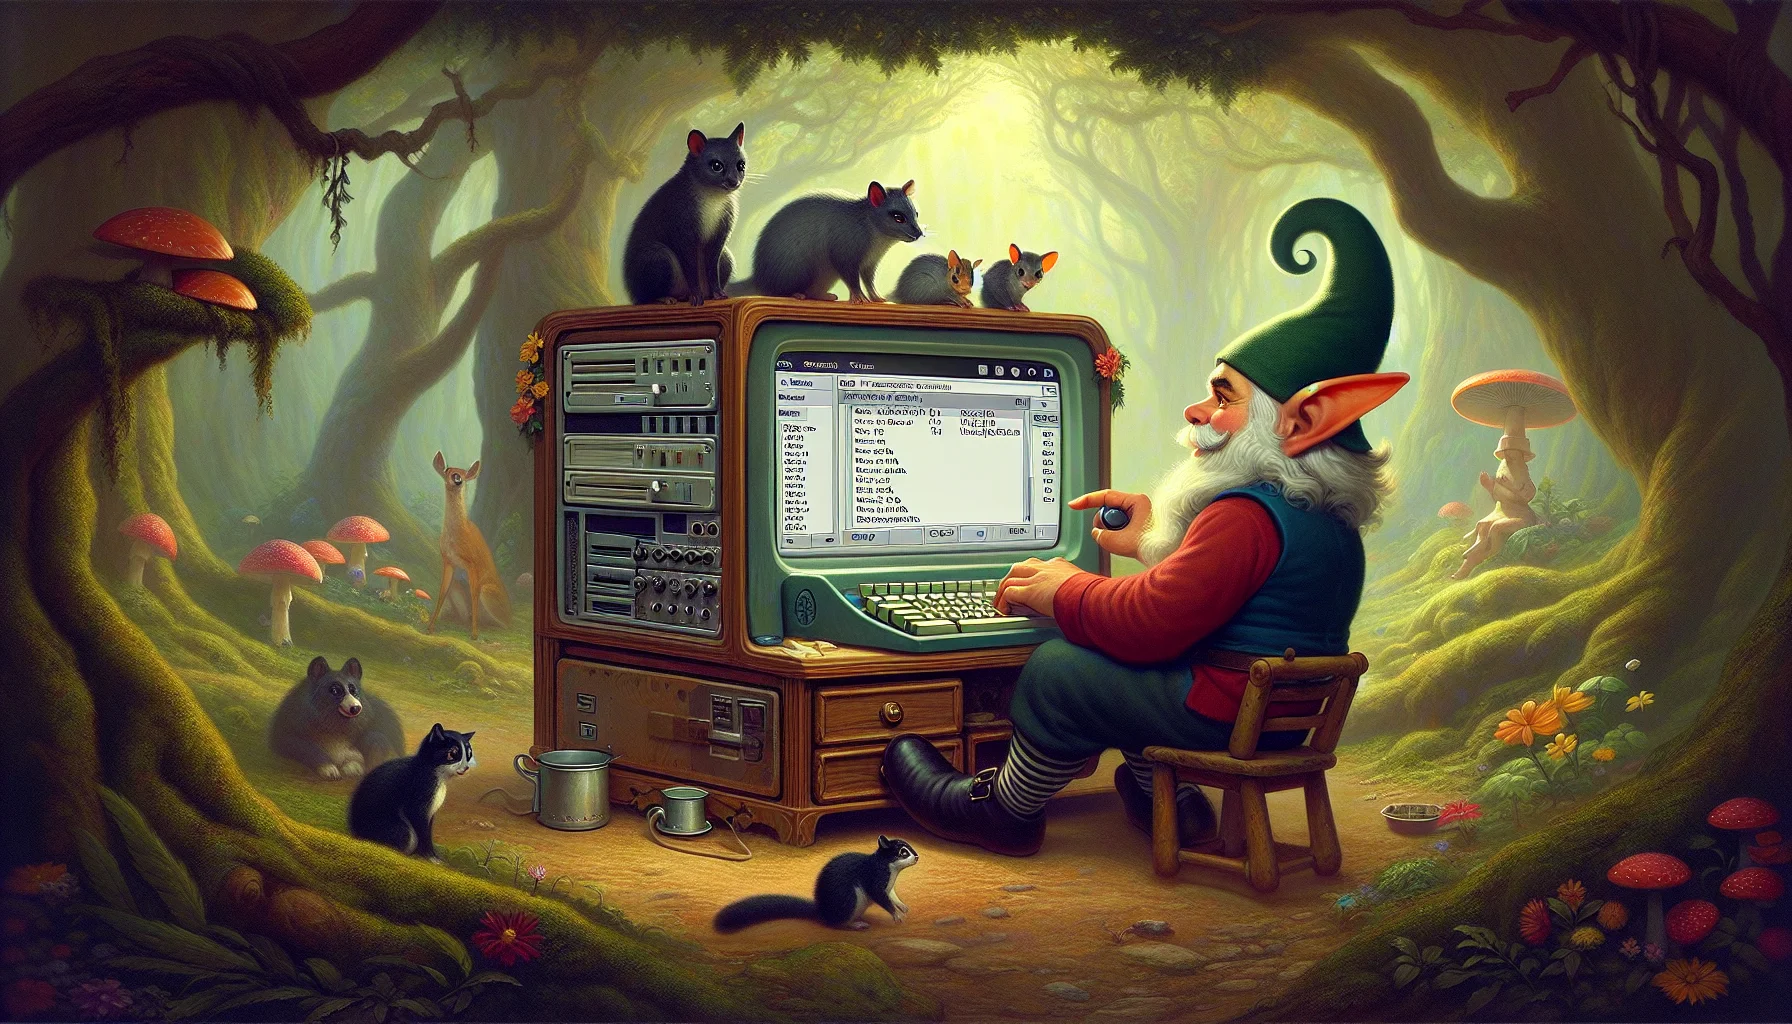 Create a humorous image of a fantasy character, perhaps a gnome or an elf, working diligently on a vintage computer. On the screen, there are glimpses of a Linux-based control panel, representative of web hosting settings and options. The character is in an enchanting forest setting with curious animals watching the process. Please infuse the image with colors and details that make it inviting and appealing.